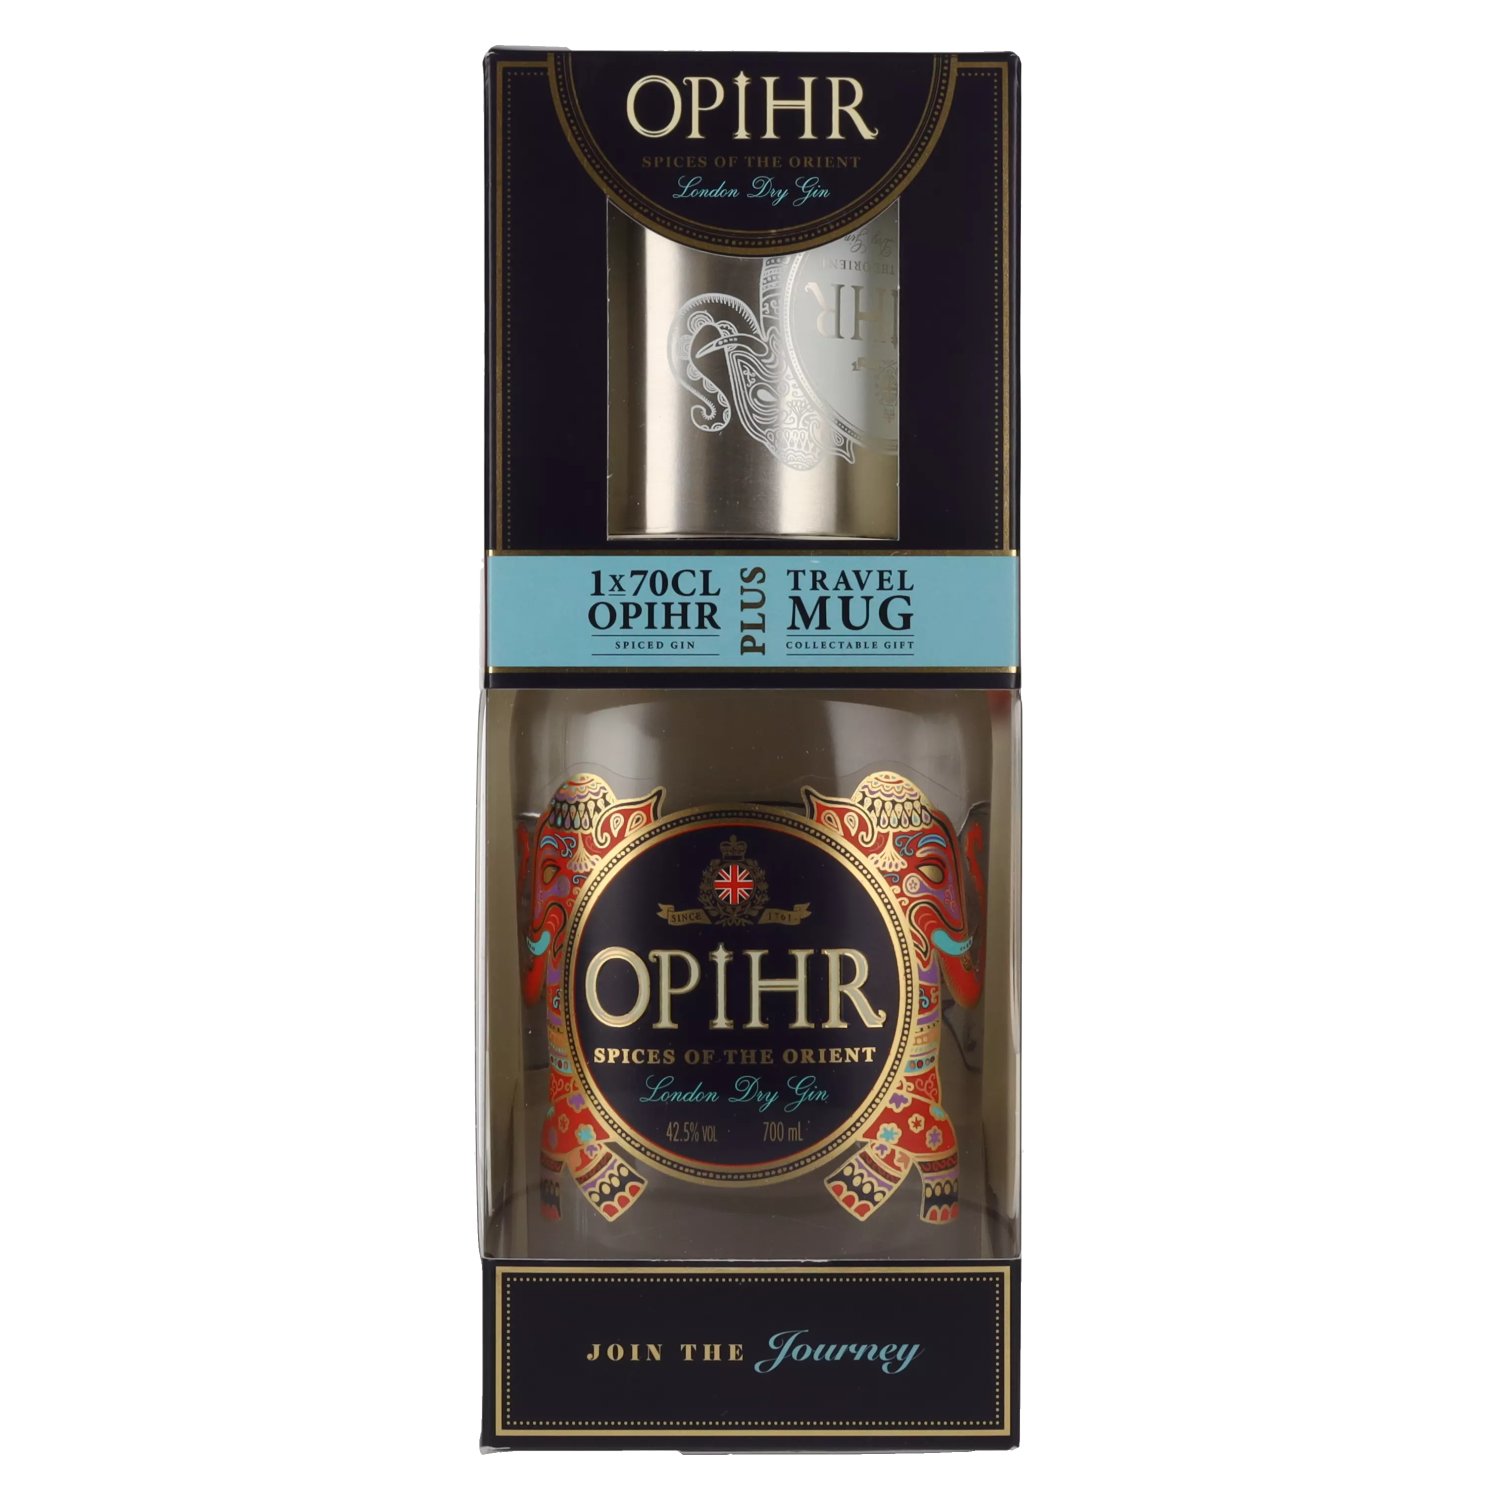 Mug Gin 0,7l Giftbox ORIENTAL SPICED Opihr London 42,5% Dry Travel with in Vol.